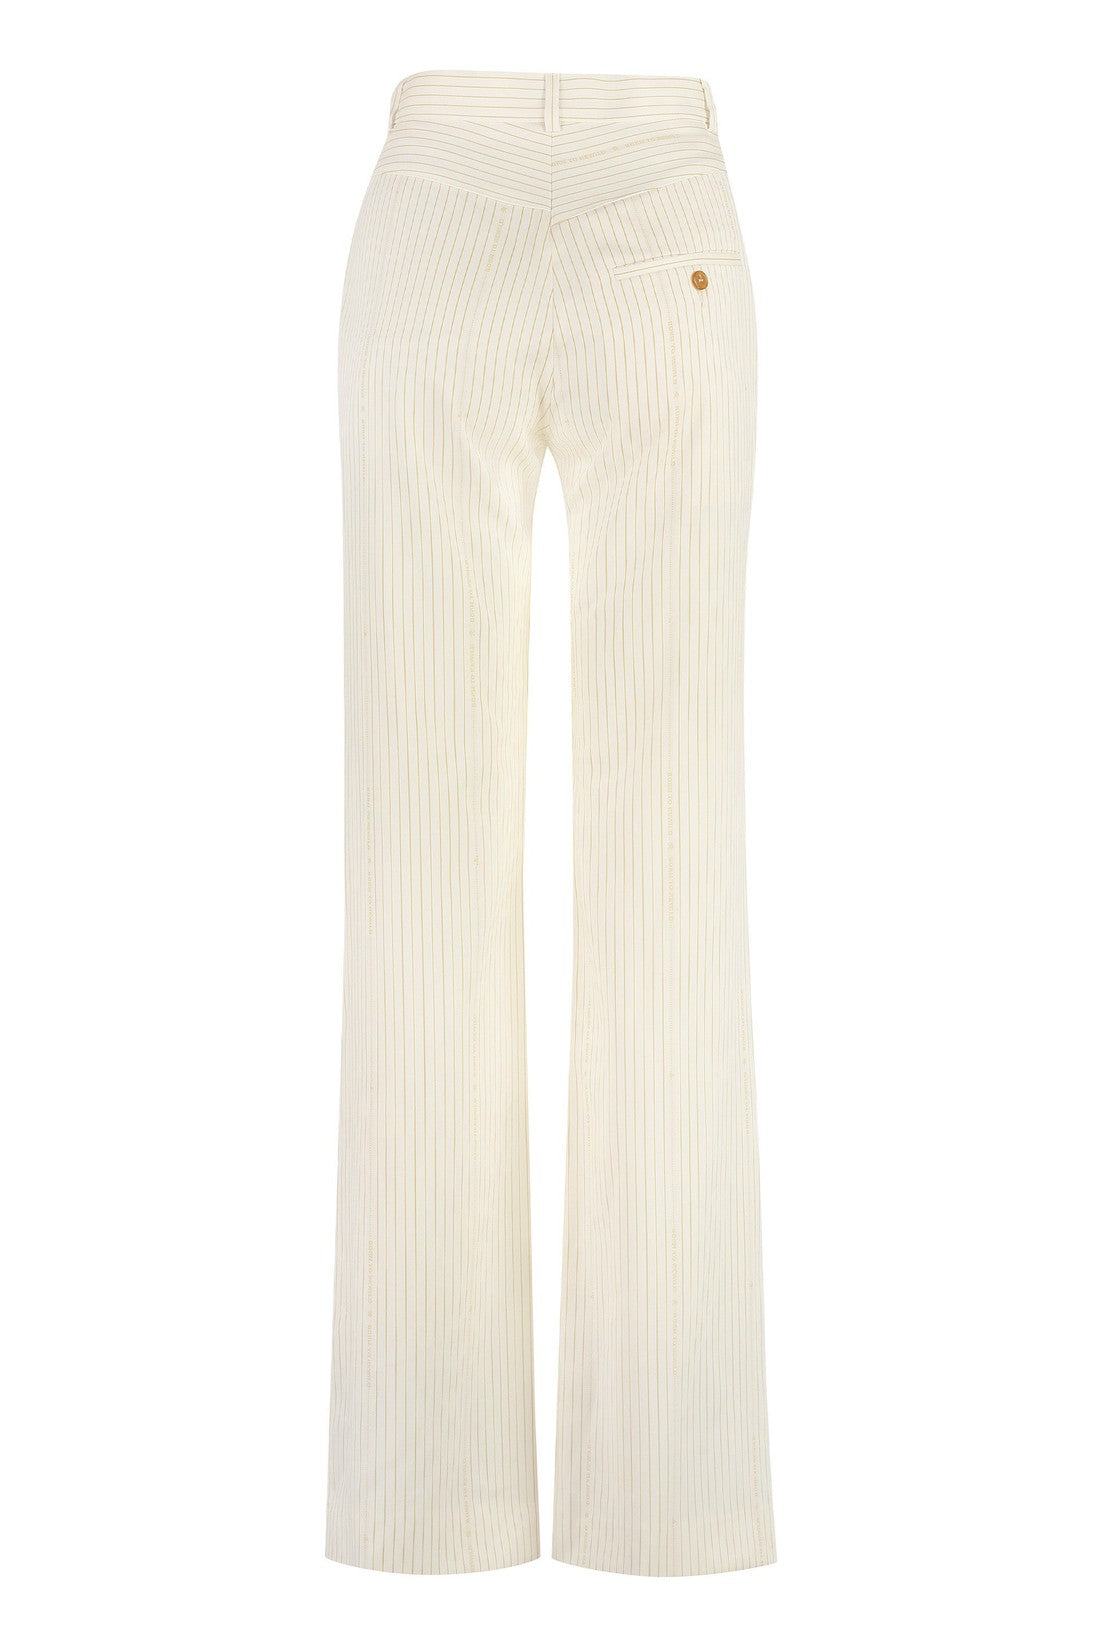 Vivienne Westwood-OUTLET-SALE-Ray virgin wool trousers-ARCHIVIST